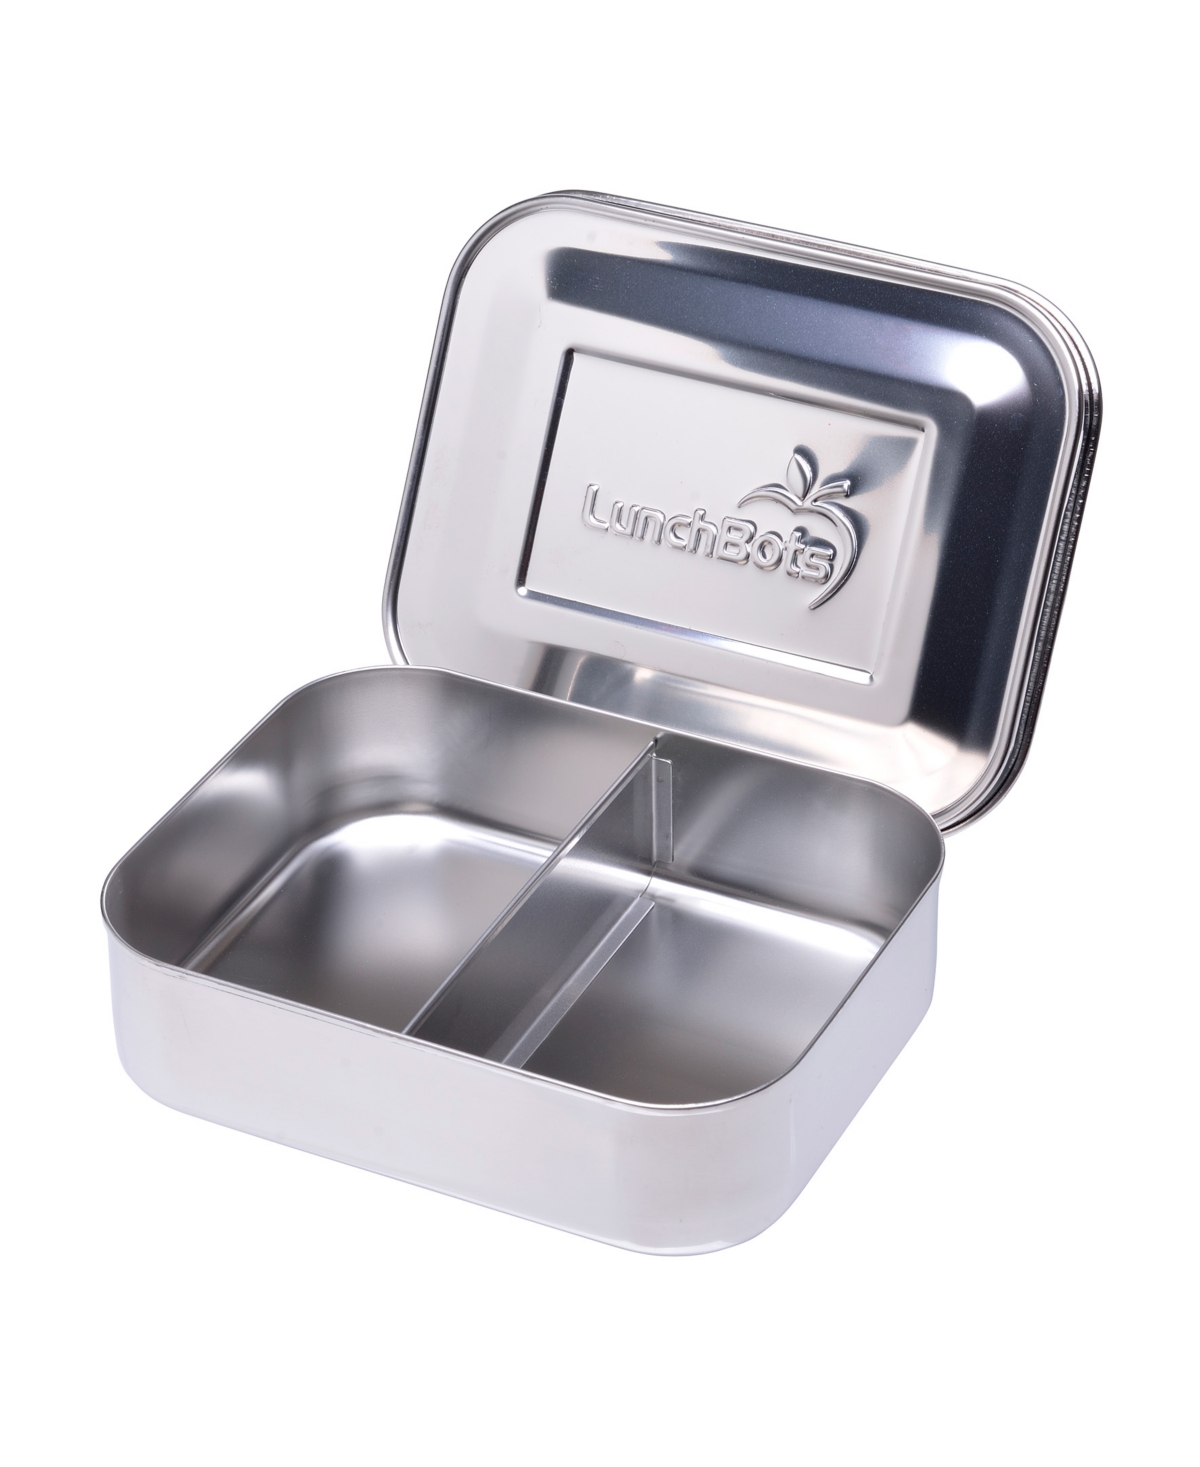 Lunchbots Stainless Steel Bento Lunch Box 2 Sections